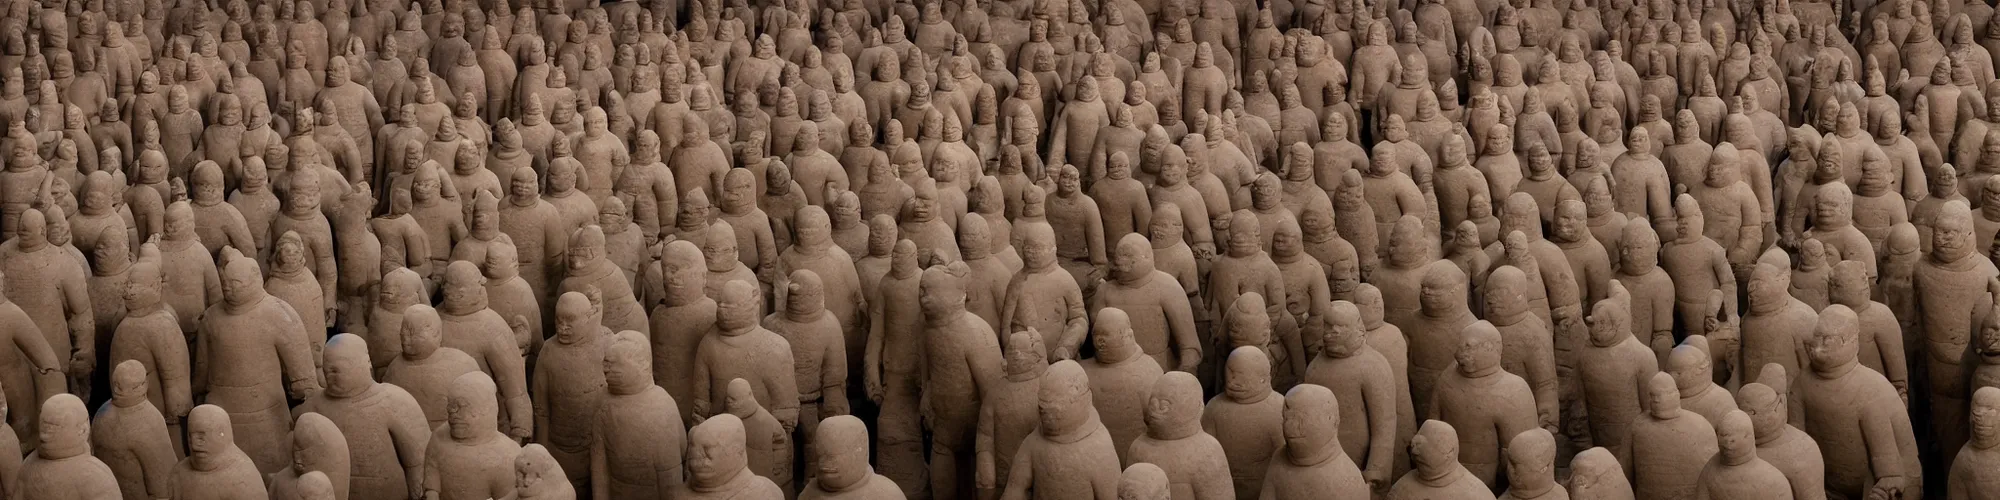 Prompt: hundreds of humans. A sea of humans. interconnected flesh. Melting clay golem humans. Dungeons&Dragons: Lemure. Lemure creature. Demonic scene. Many humans intertwined and woven together. Bodies and forms amesh. Terracotta army. Extremely unsettling artwork. Clay sculpture by Alberto Giacometti.